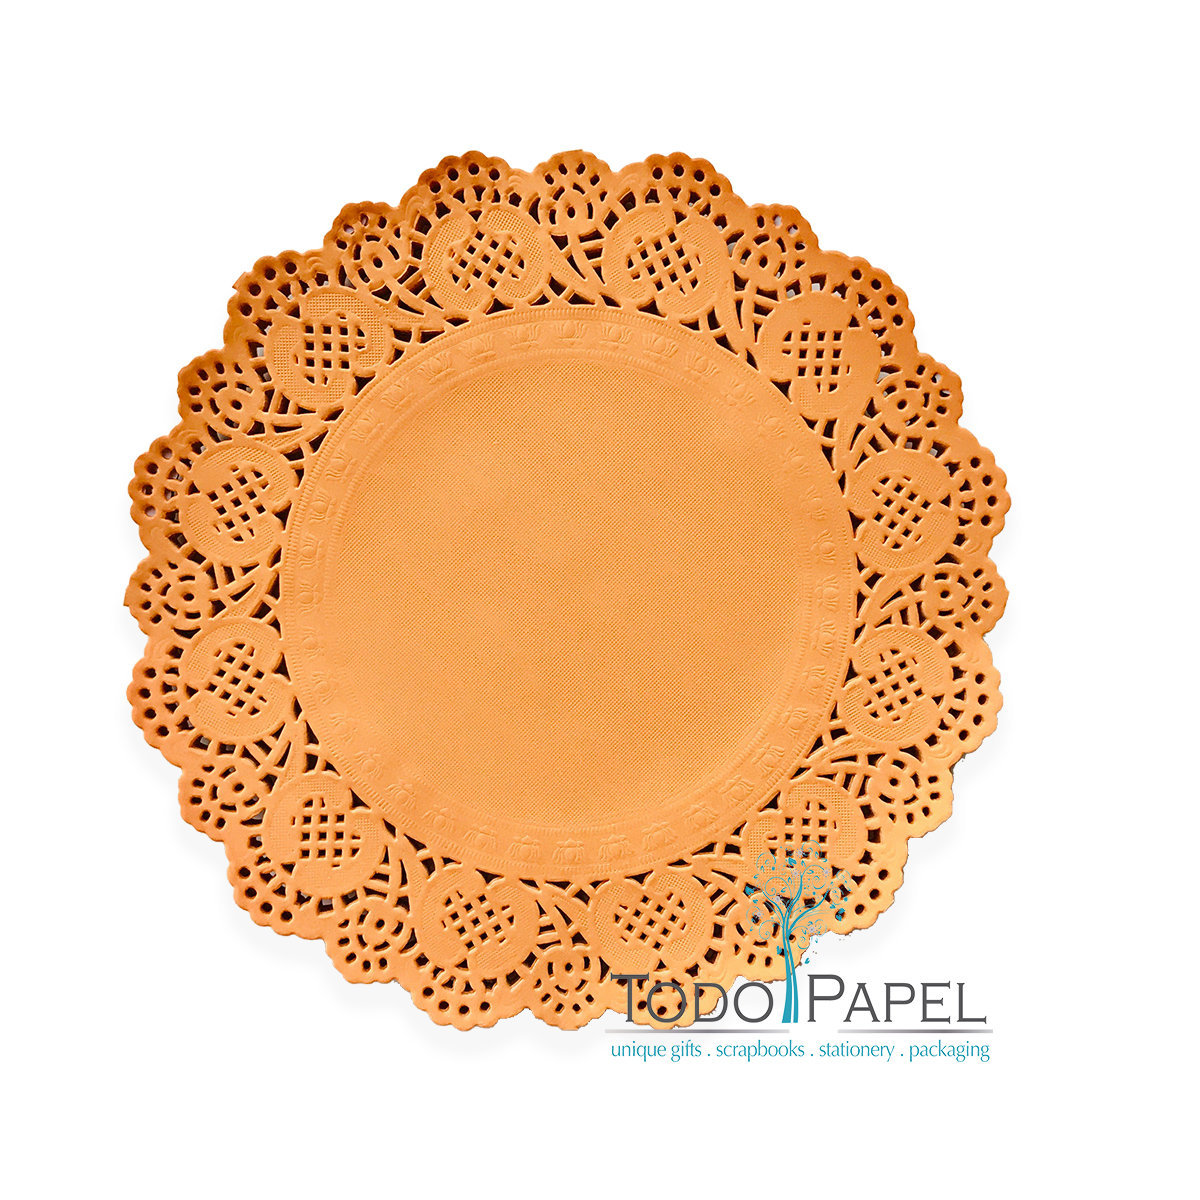 100 Pack - 10" Rustic Mediterranean Orange Paper Doilies | Wedding Reception Chargers | Birthday Party Table Decor And Diy Crafting